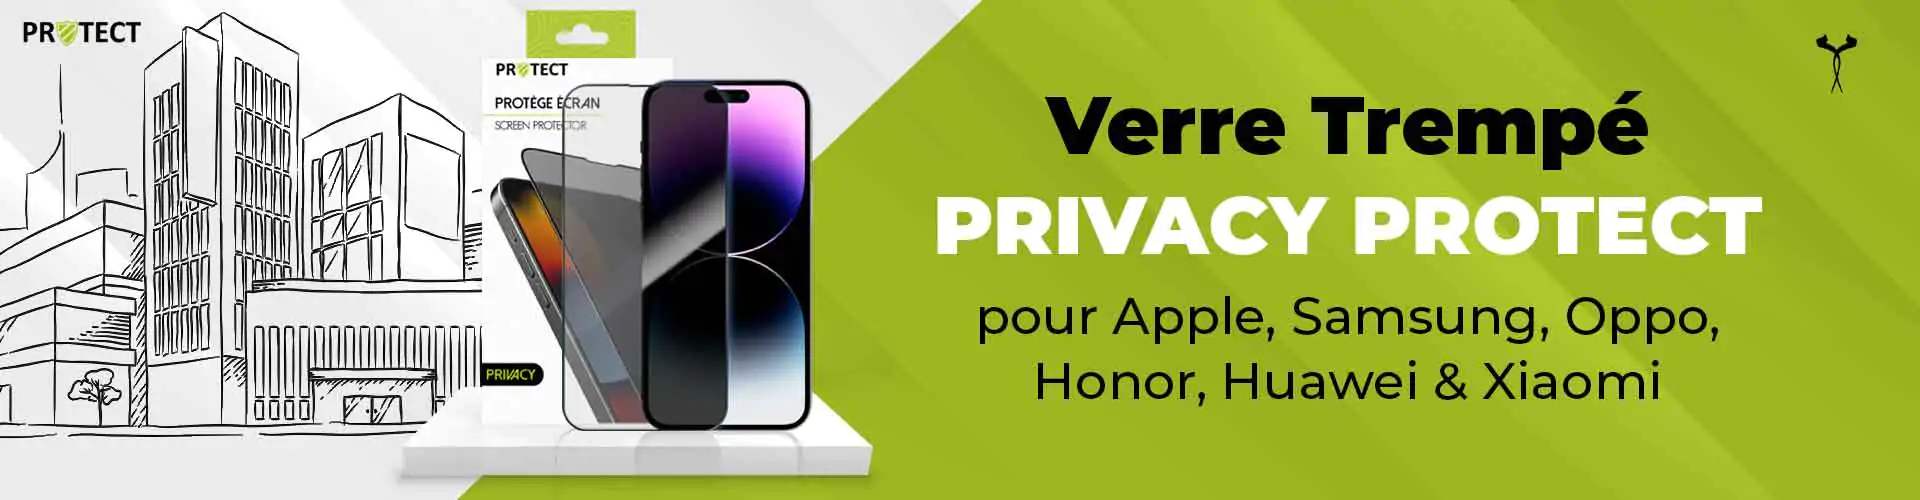 Verre Trempé PRIVACY PROTECT pour Apple, Samsung, Oppo, Honor, Huawei & Xiaomi